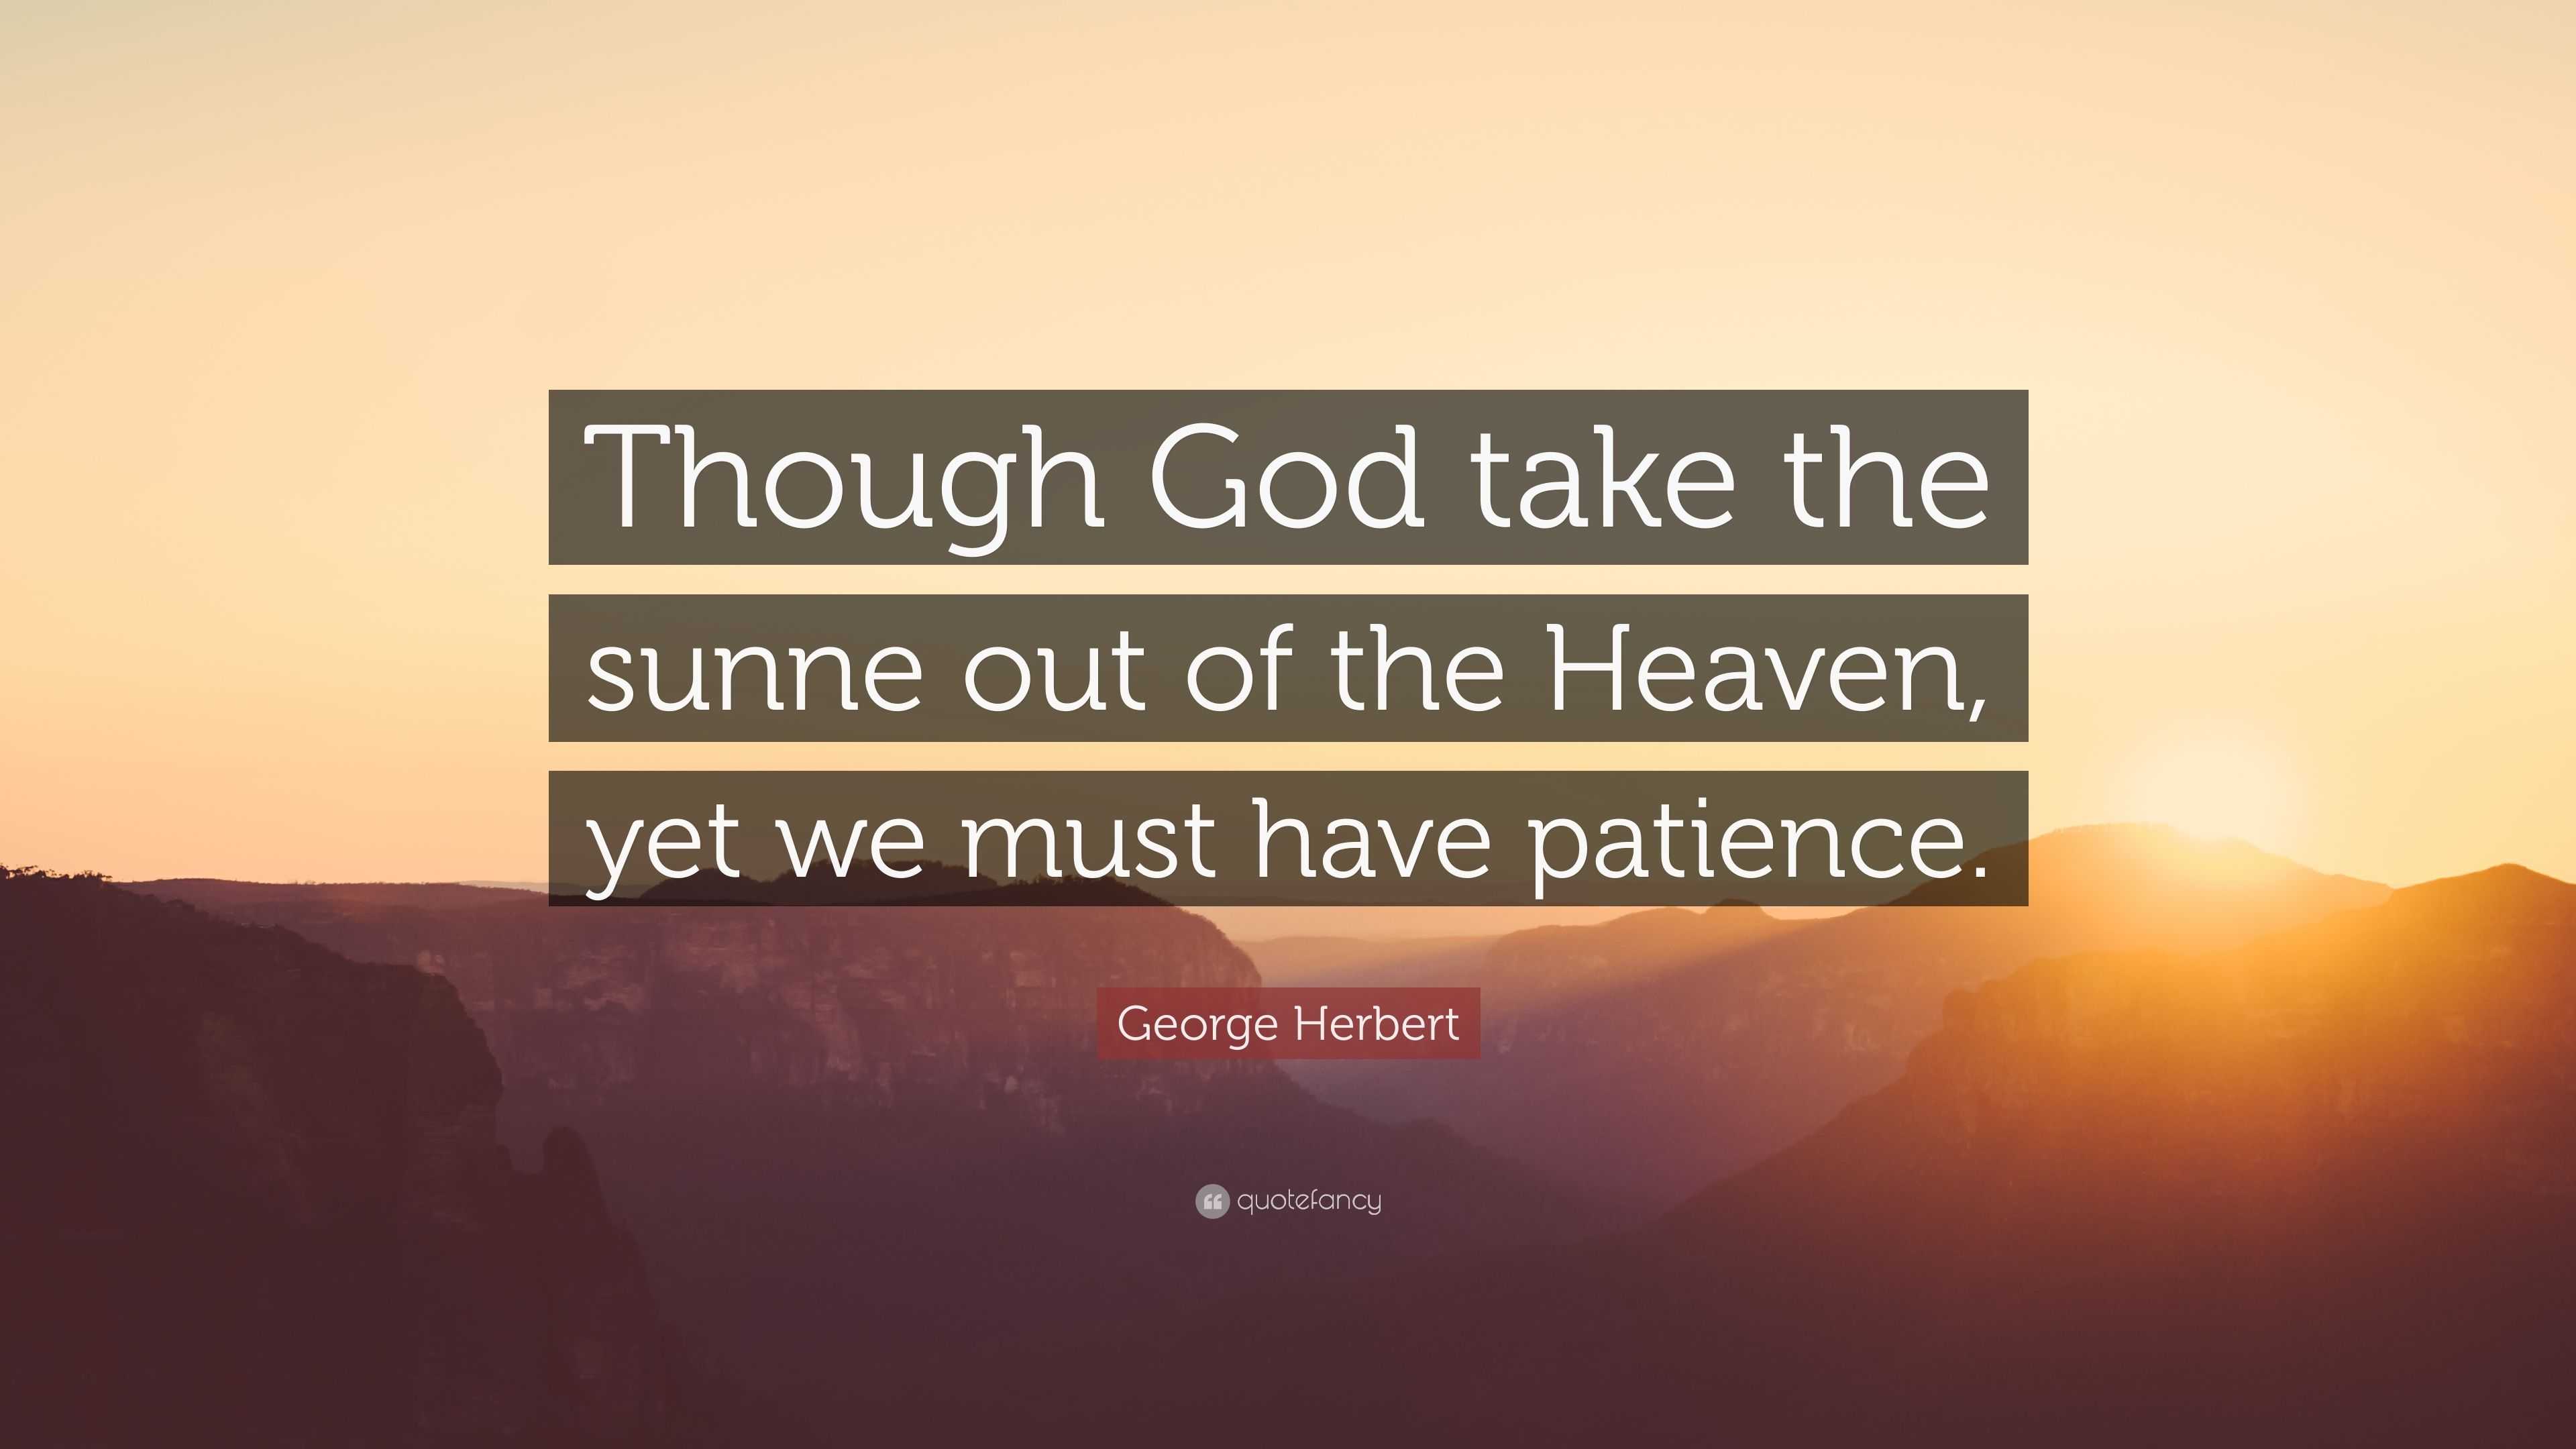 George Herbert Quote: “Though God take the sunne out of the Heaven, yet ...